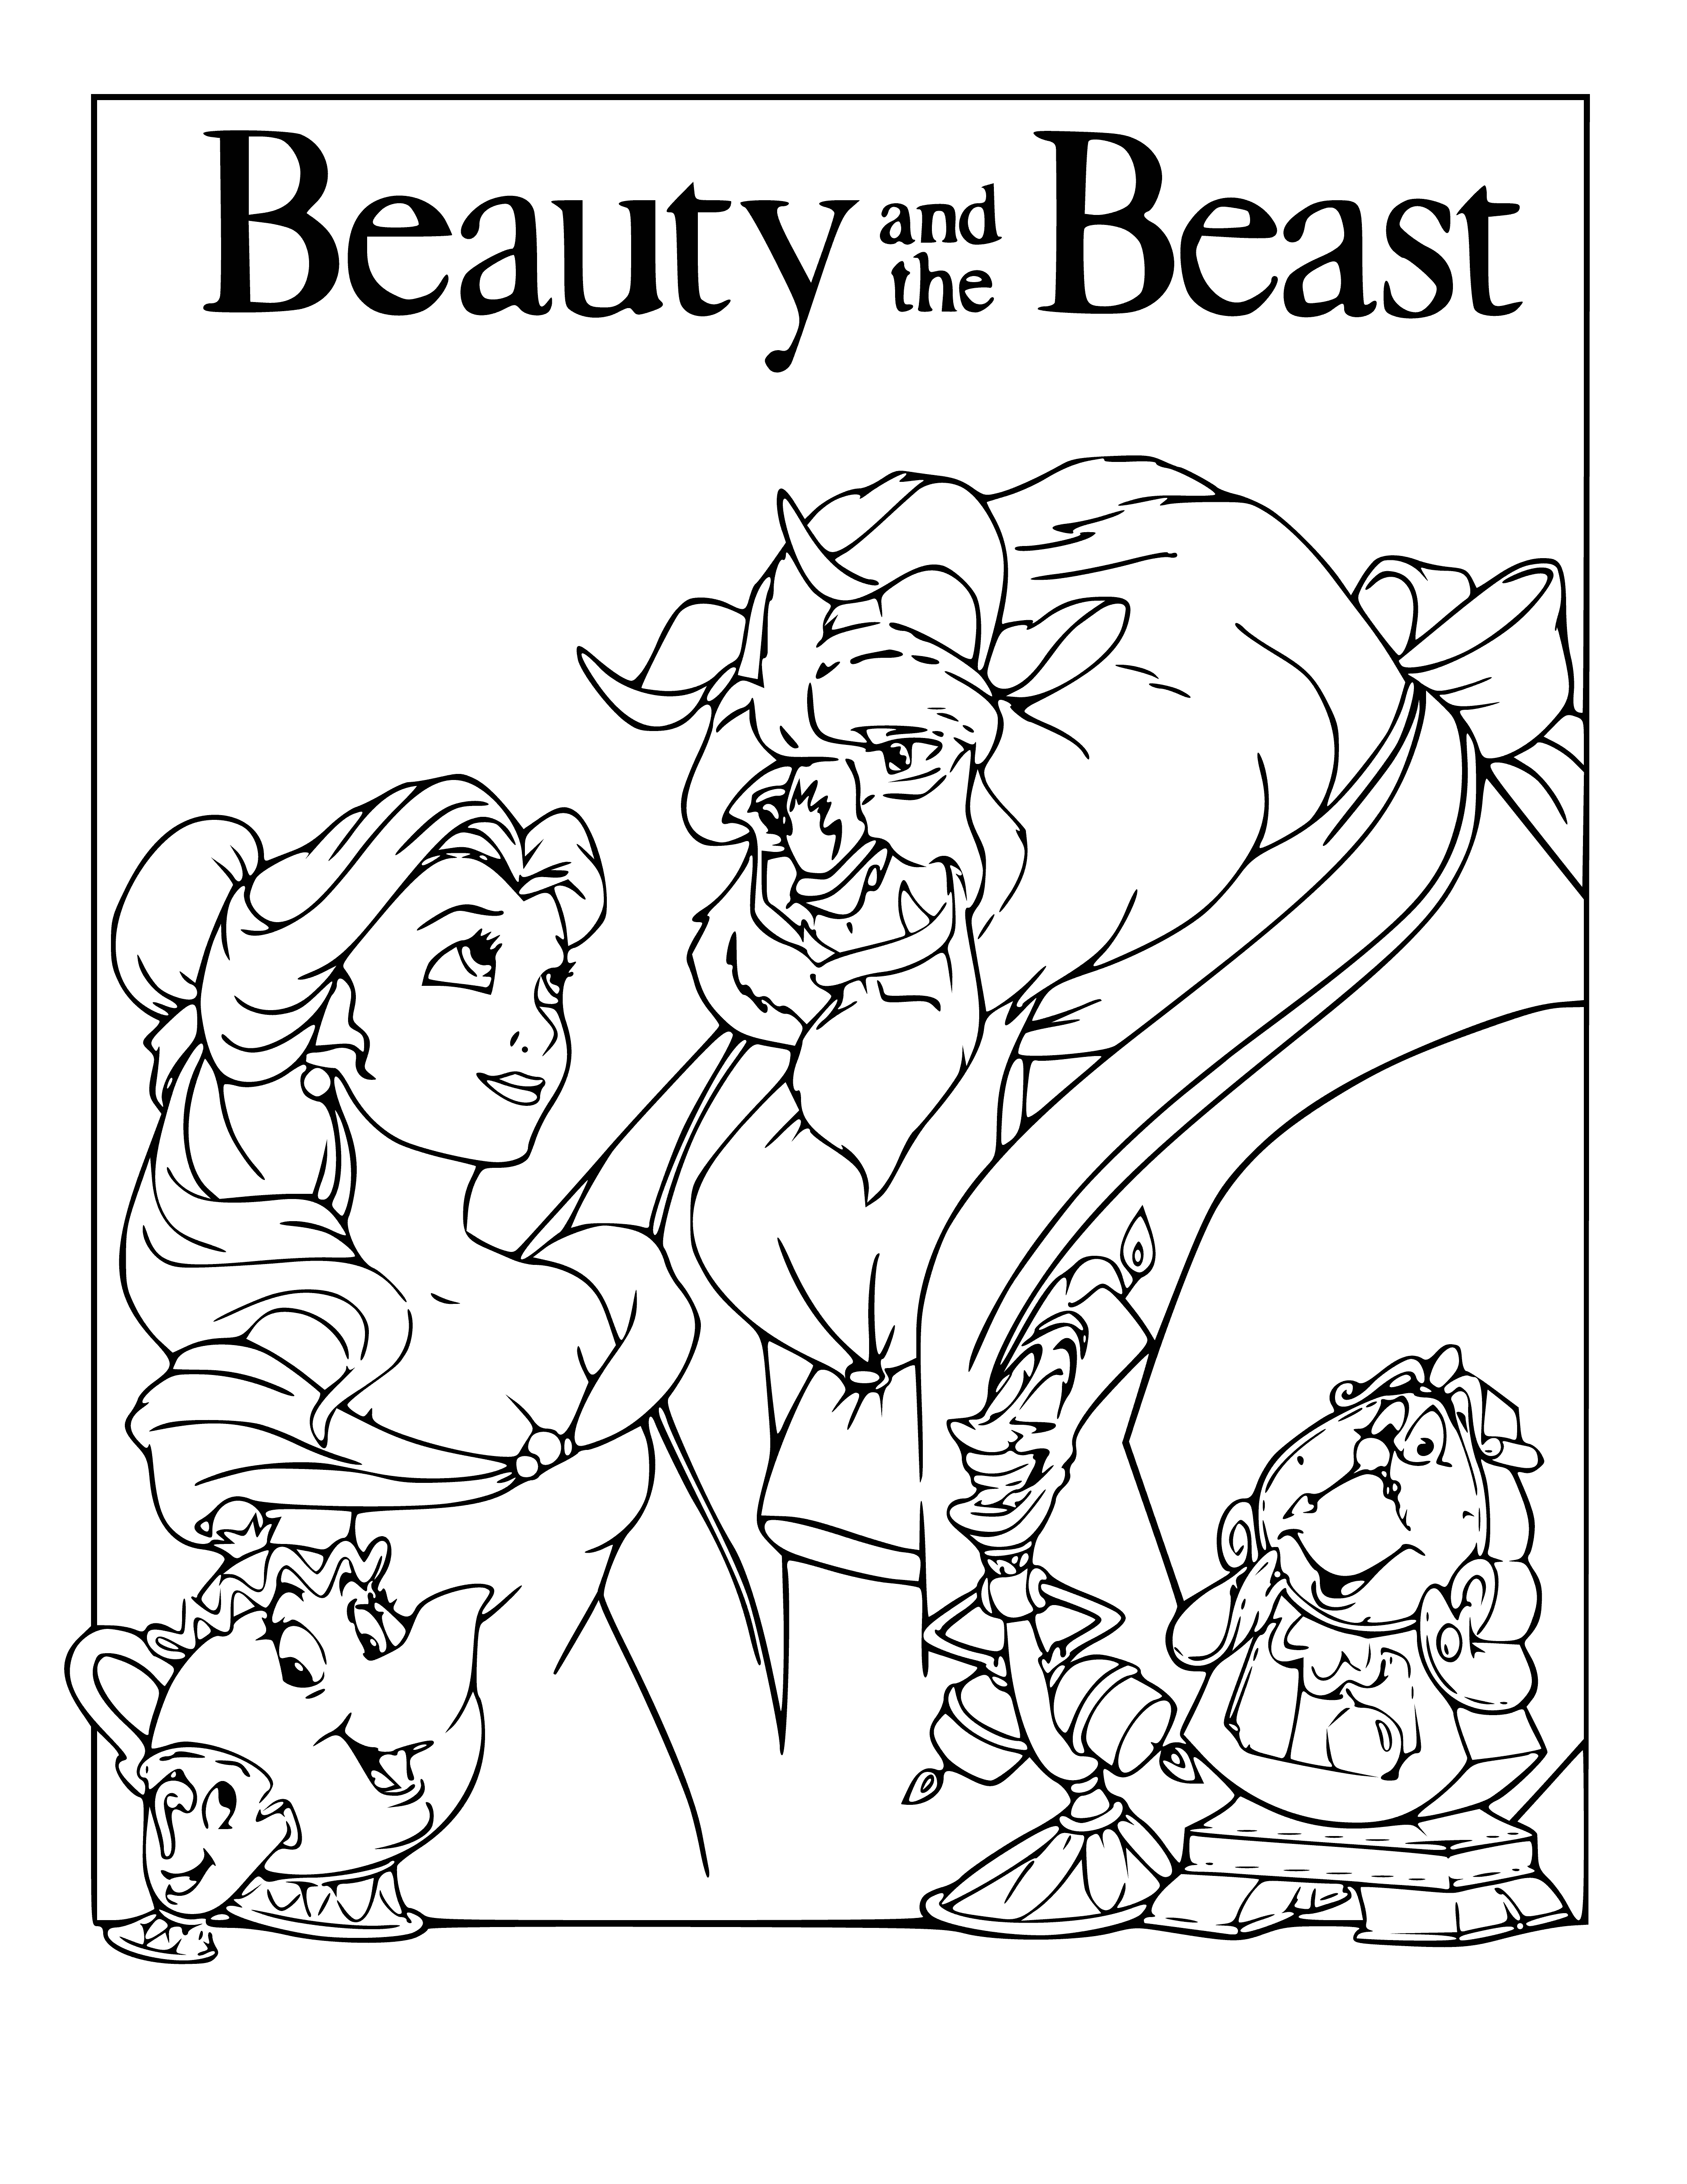 coloring page: Girl colors coloring page of rose with crayons at table.